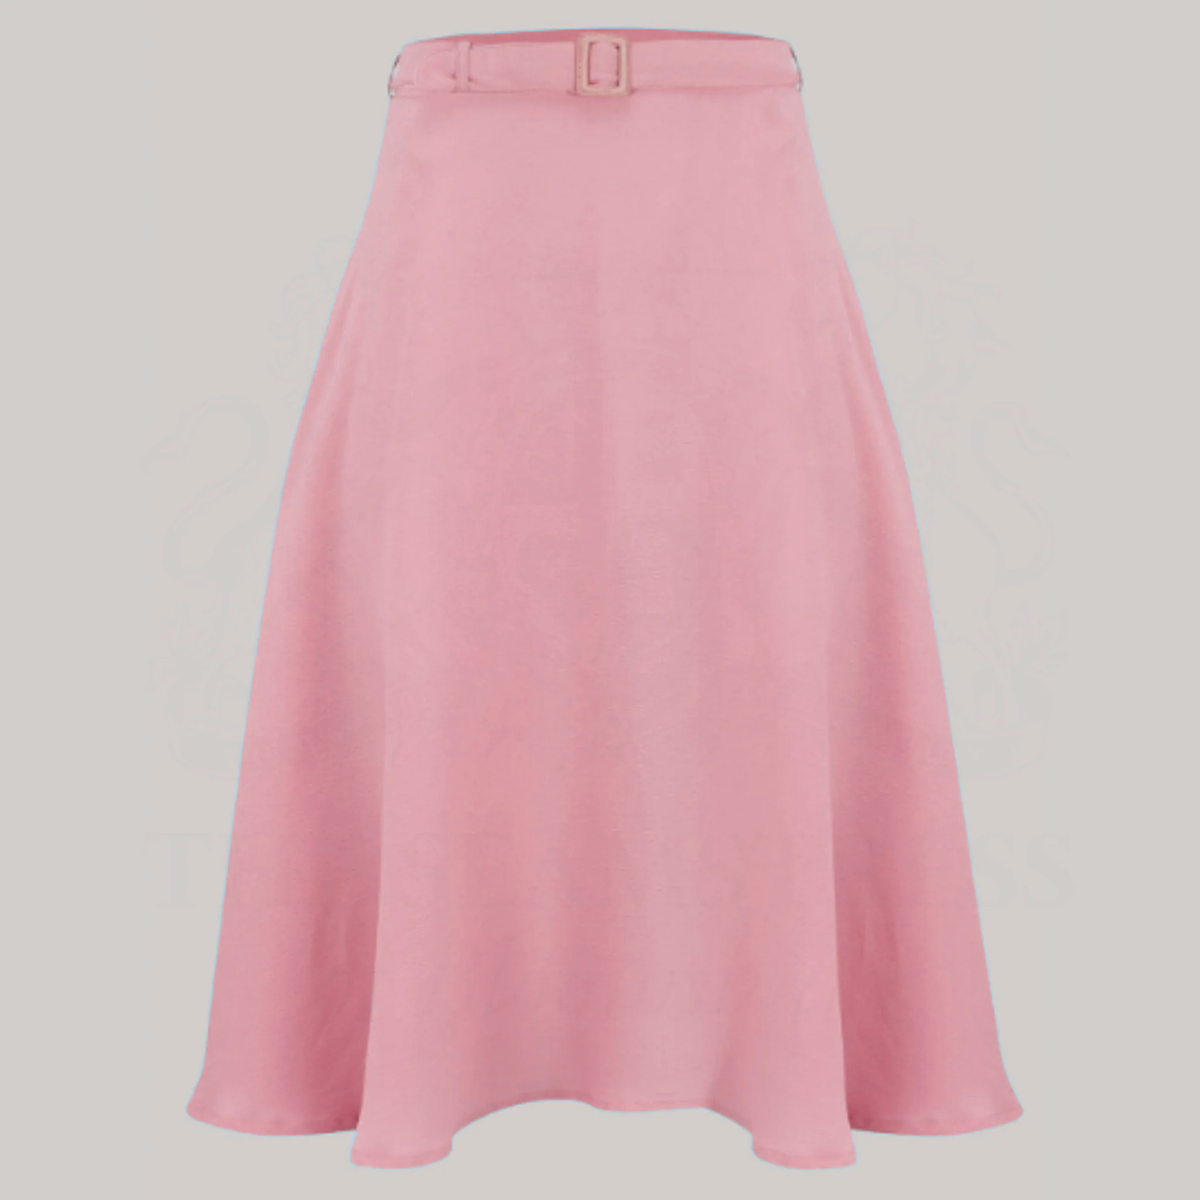 Circle Skirt in Blossom Pink